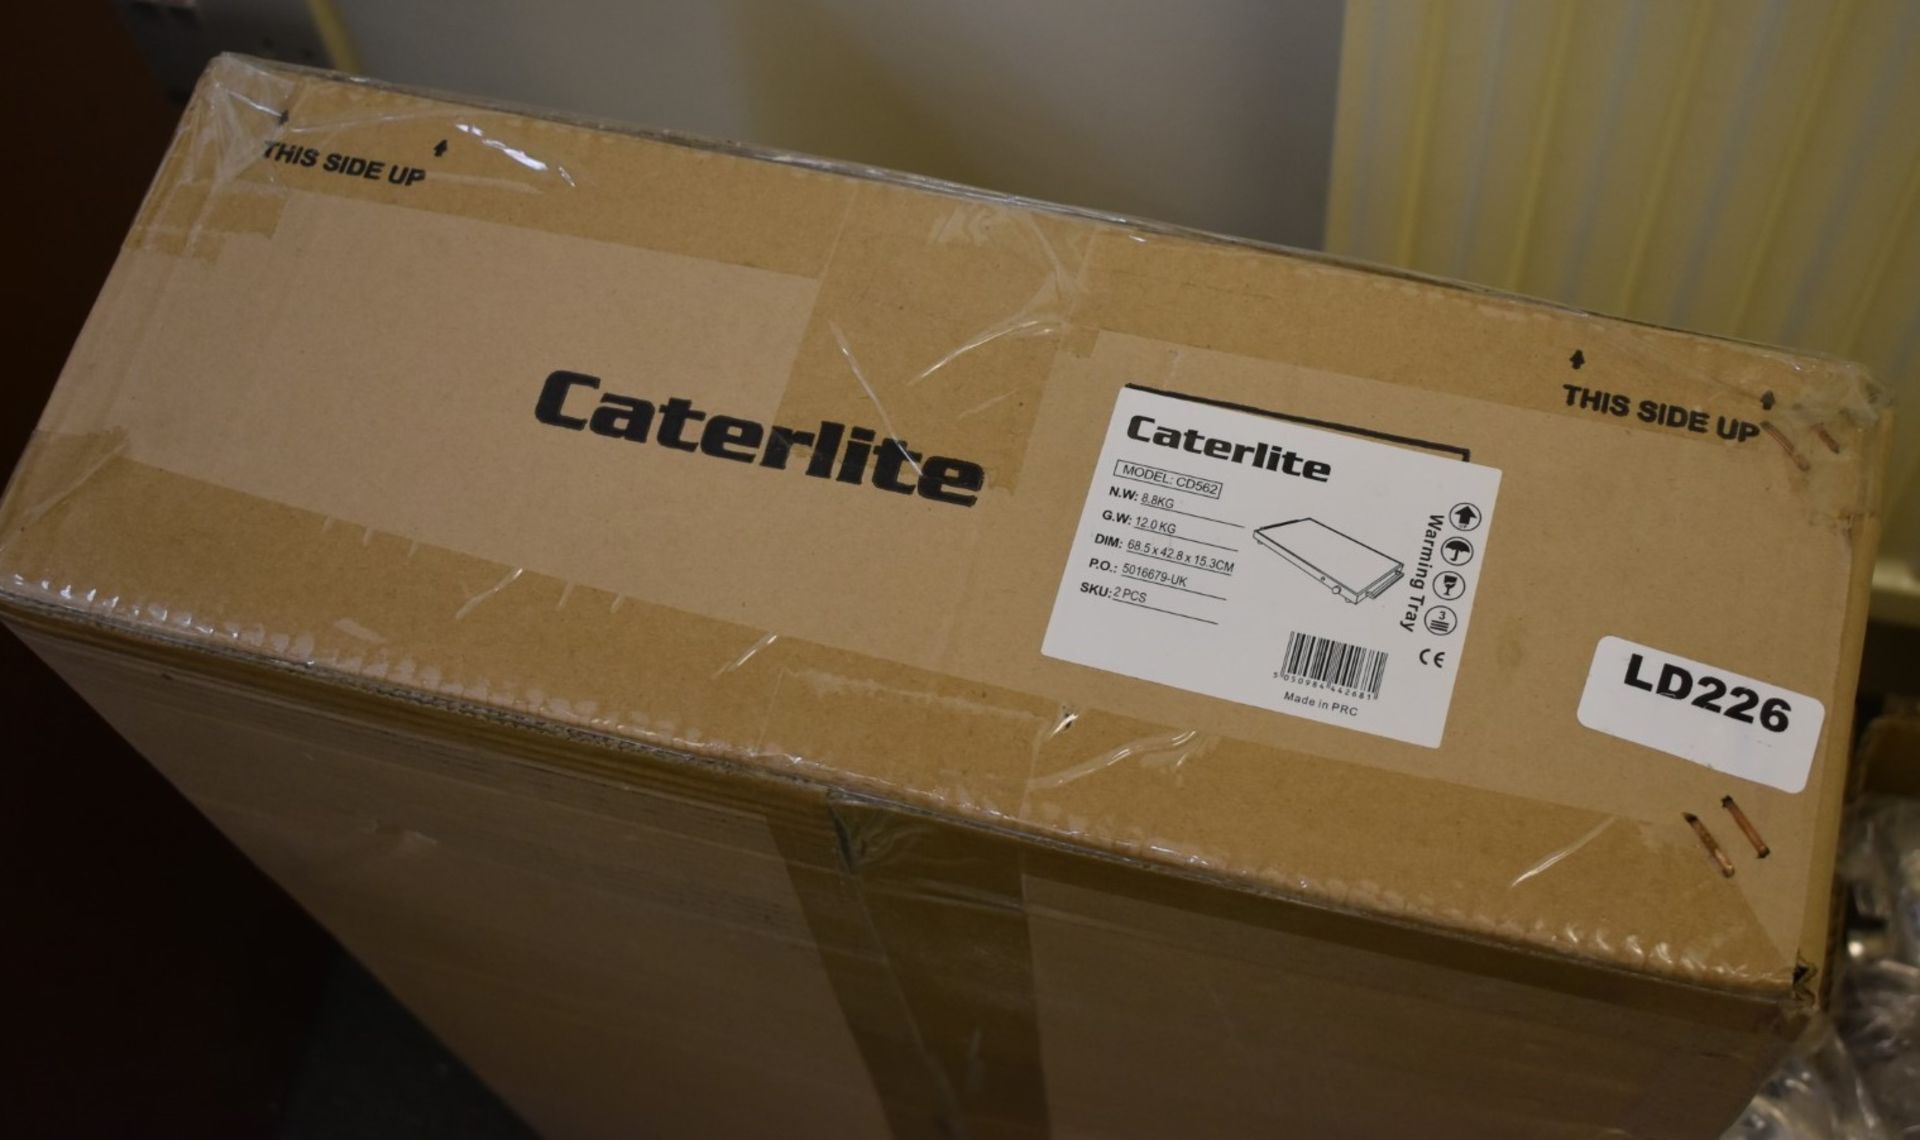 1 x Caterlite Hot Plate Food Warmer - Model CD562 - Brand New and Boxed - Ref LD226 B2 - CL409 - - Image 2 of 2